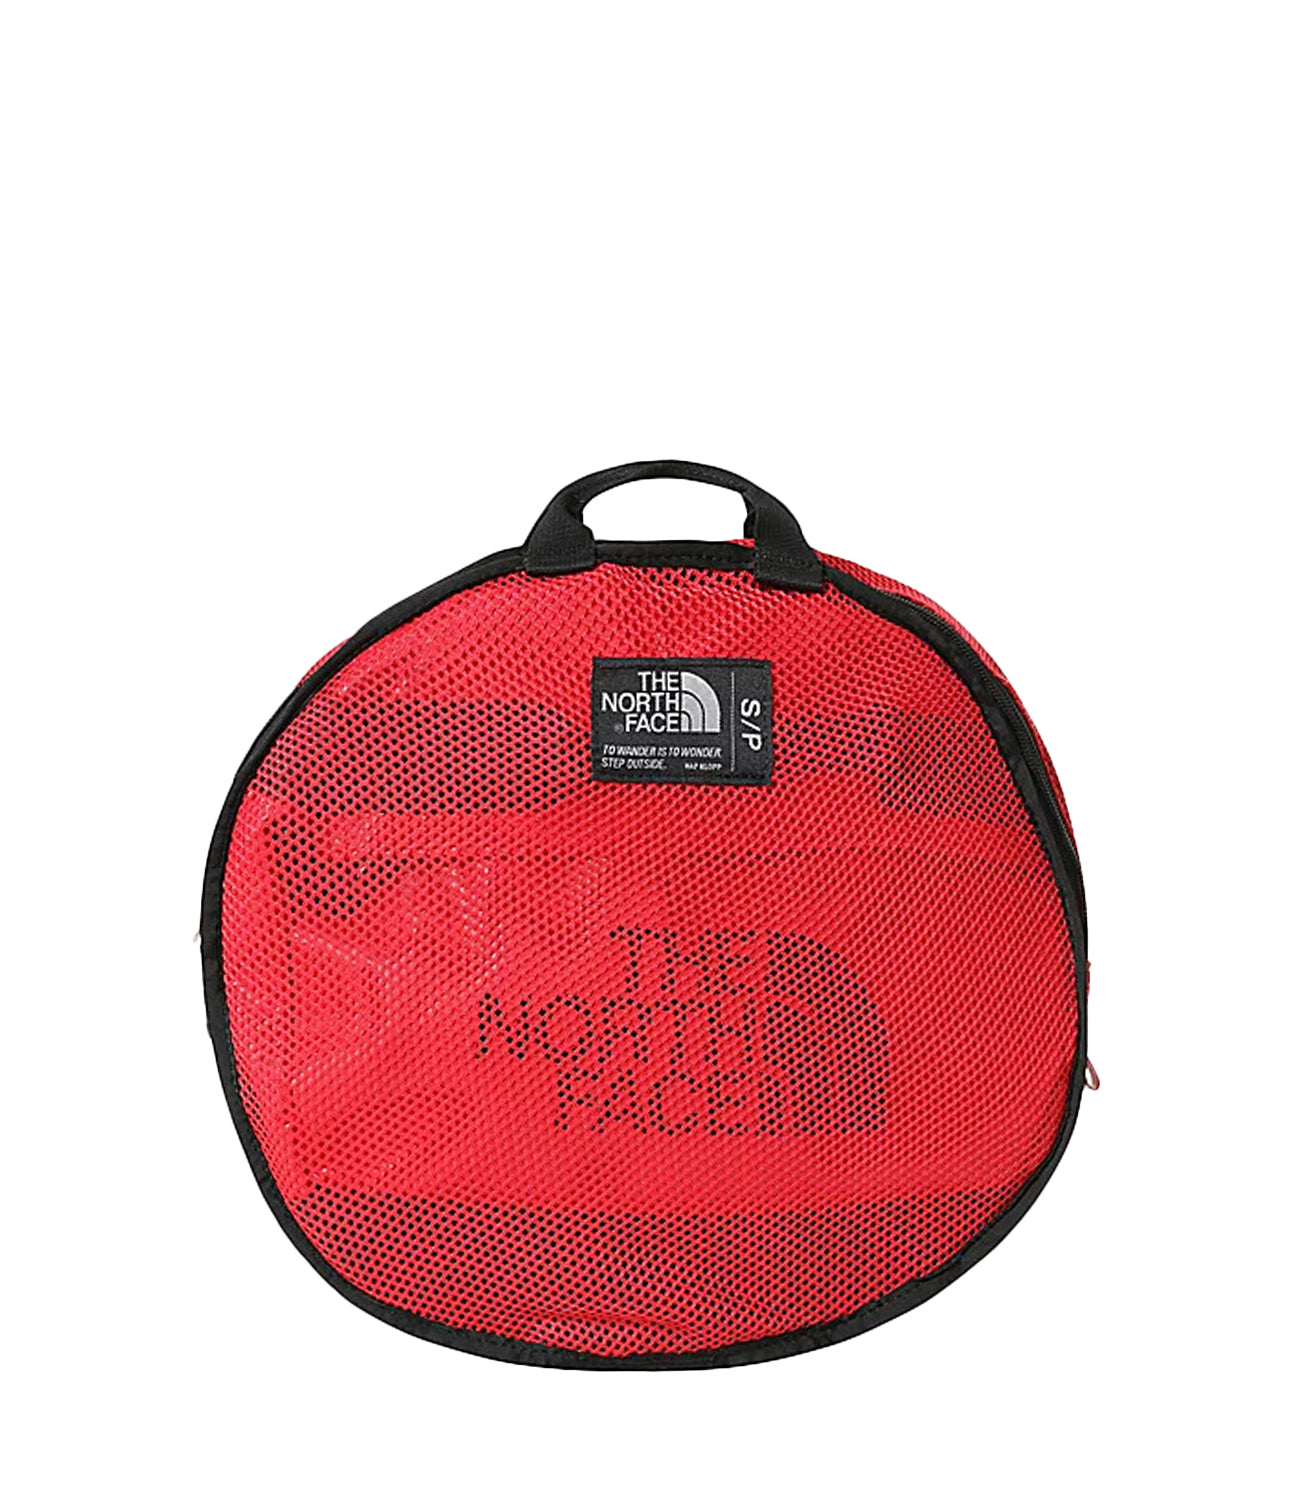 The North Face | Red and Black Travel Bag